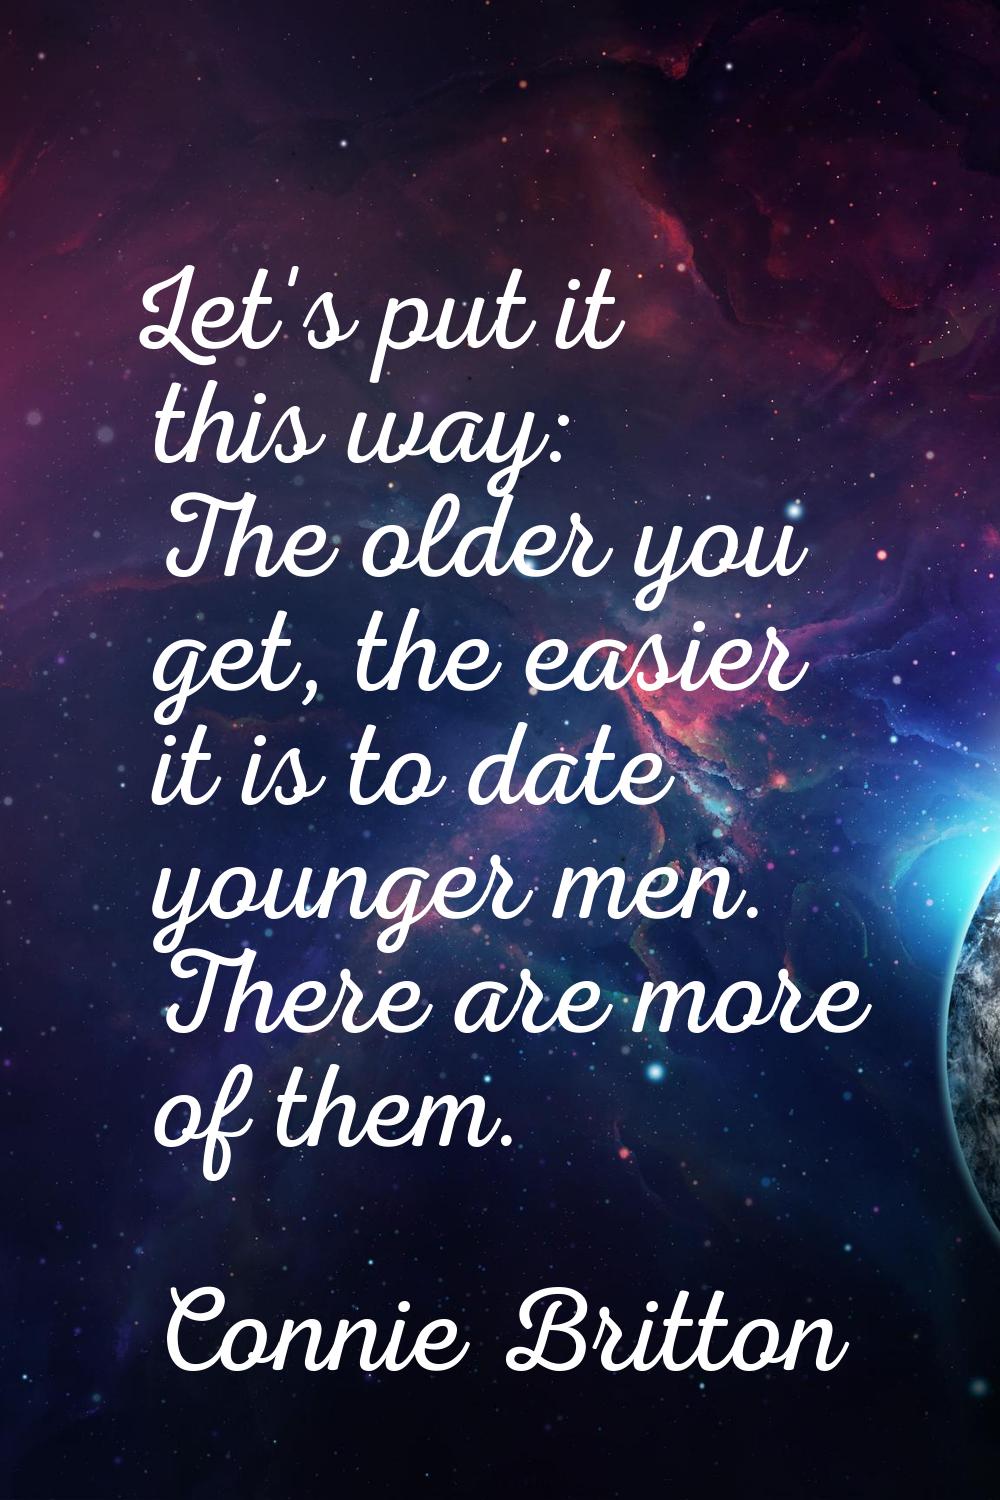 Let's put it this way: The older you get, the easier it is to date younger men. There are more of t